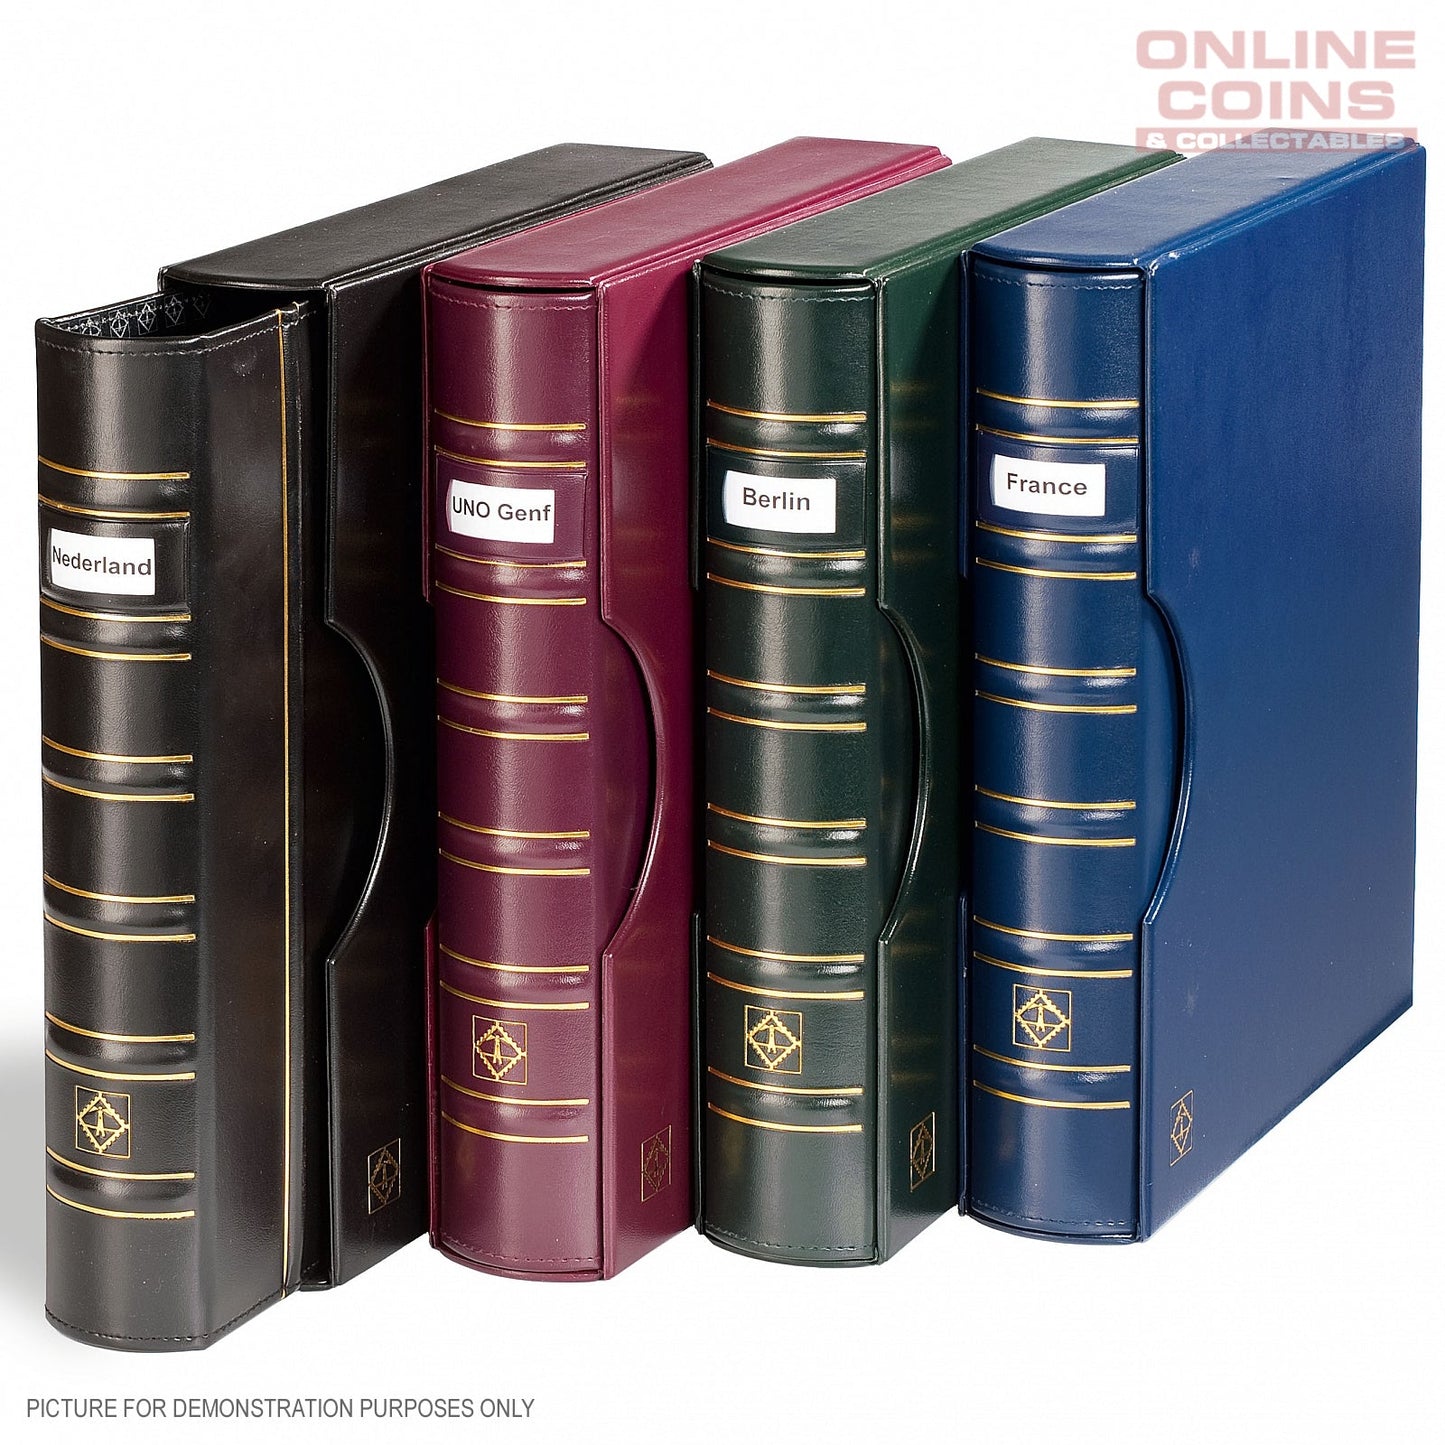 Lighthouse Classic Grande SIGNUM Binder and Slipcase - RED